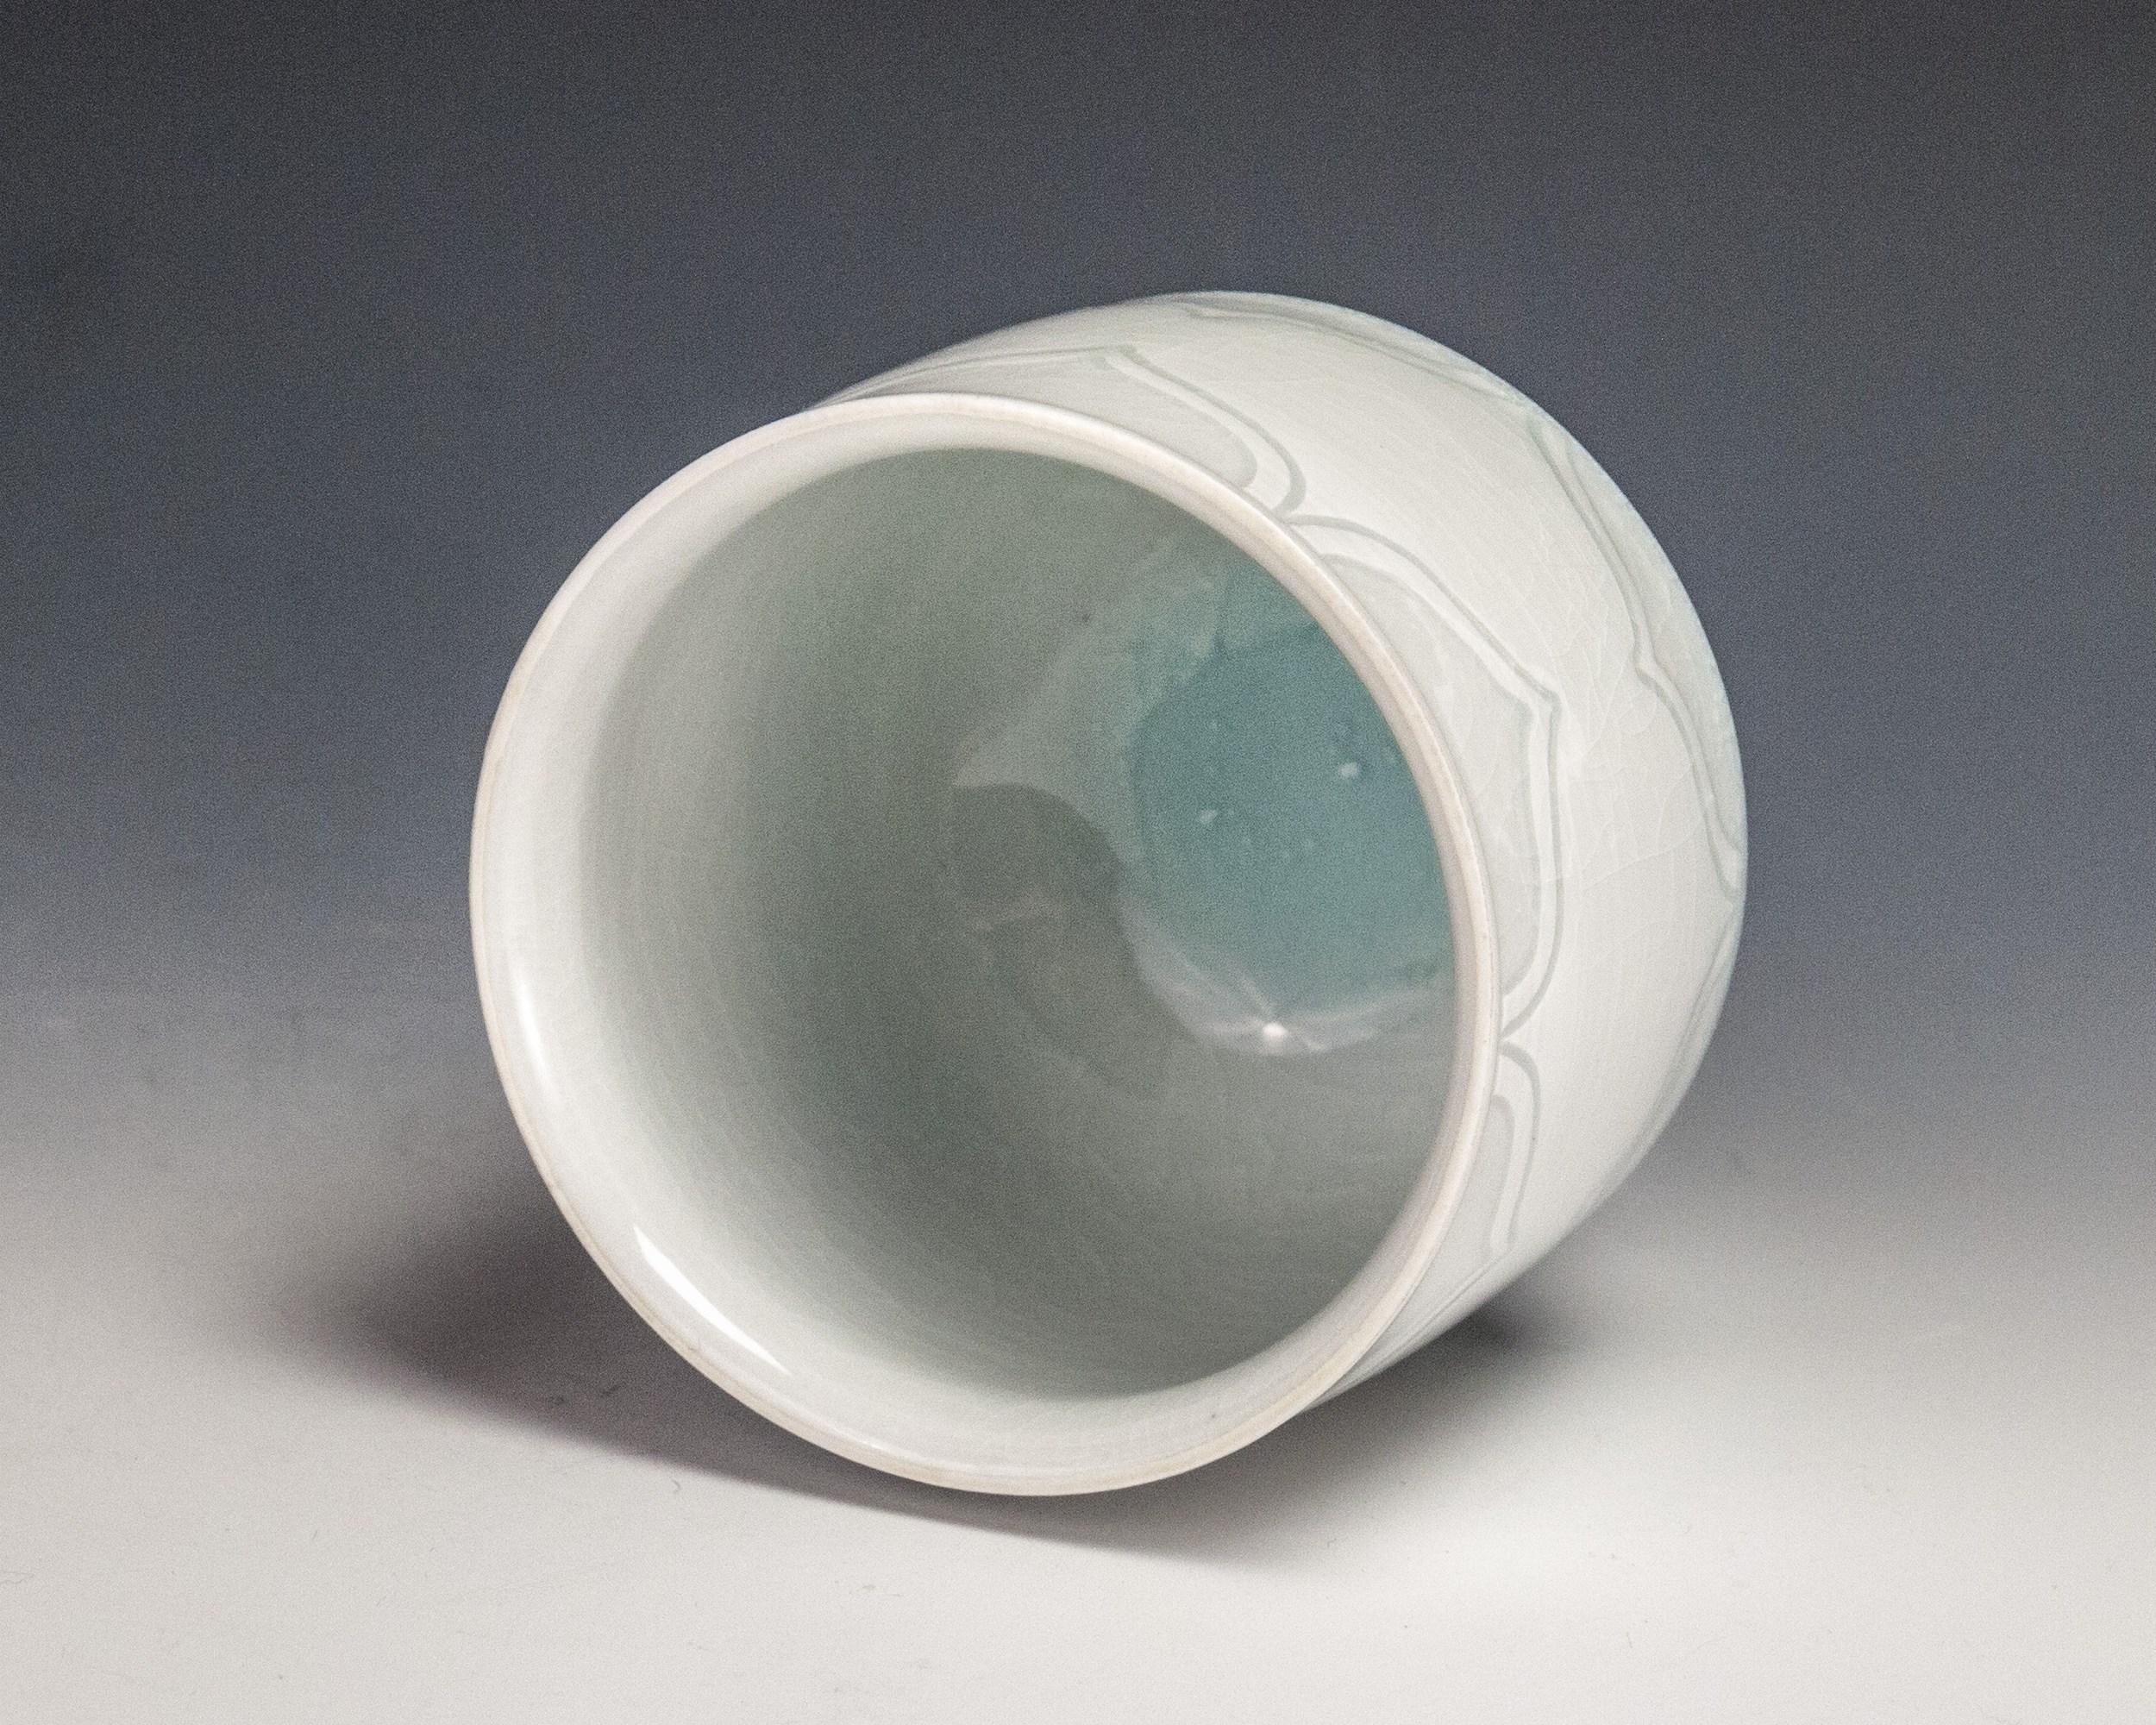 Sgraffito White Cup
Materials: Porcelain and Glaze
Date: 2018

Steven Young Lee has been the resident artist director of the Archie Bray Foundation for the Ceramic Arts in Helena, Montana since 2006. In 2004-05, he lectured and taught at numerous